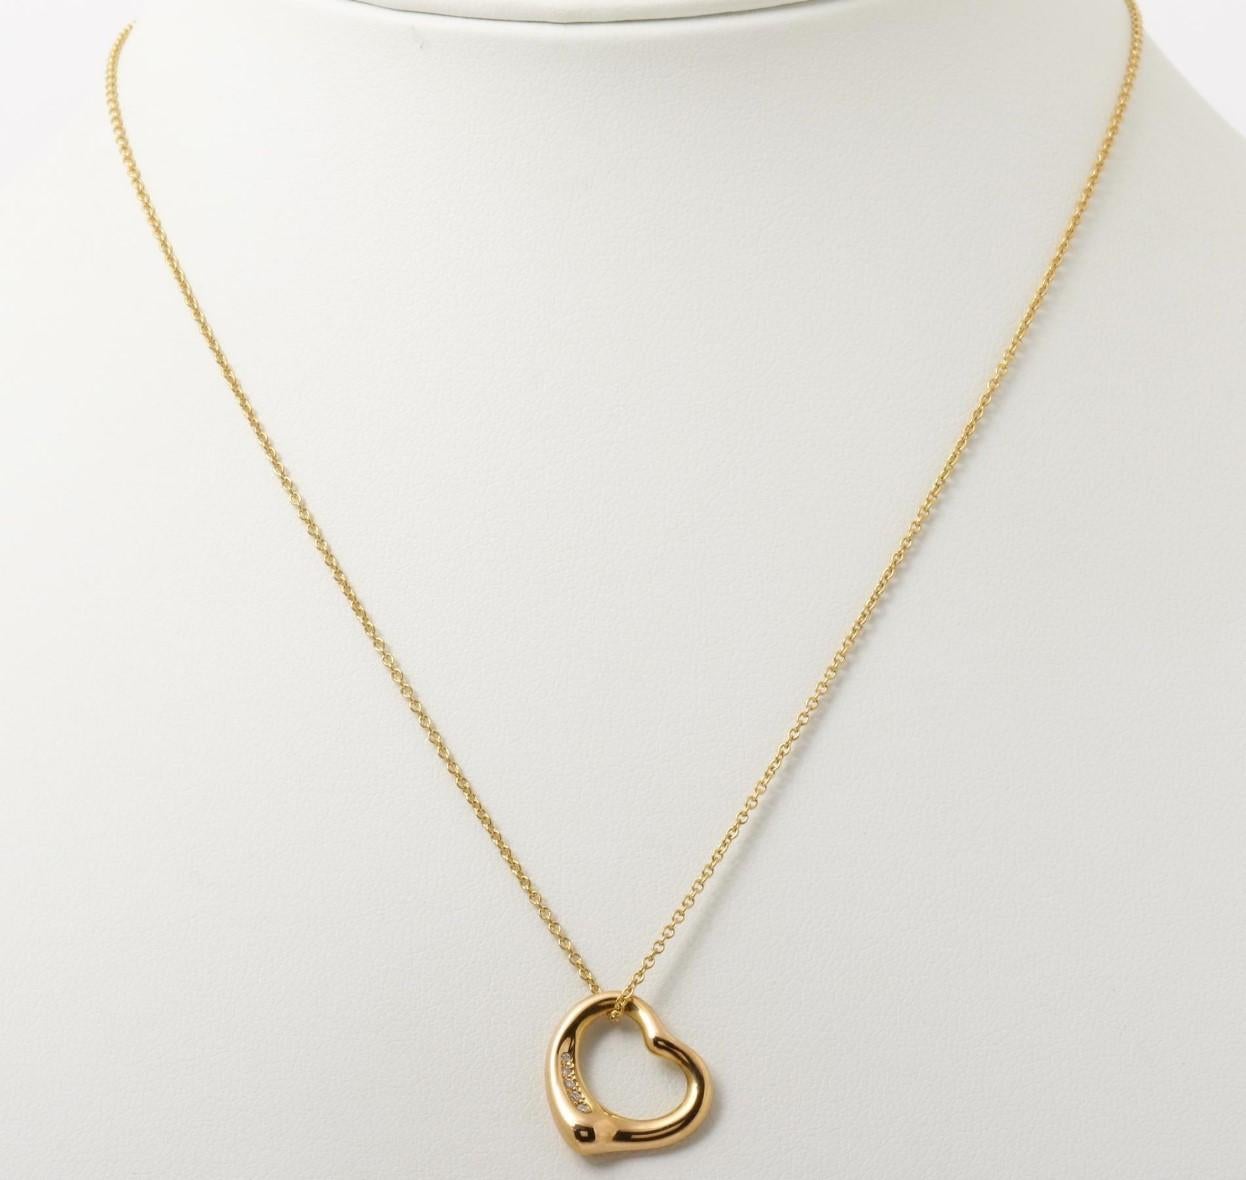 Tiffany&Co. Open Heart Necklace Pendant - 5PD  In Excellent Condition For Sale In Oyster Bay, NY